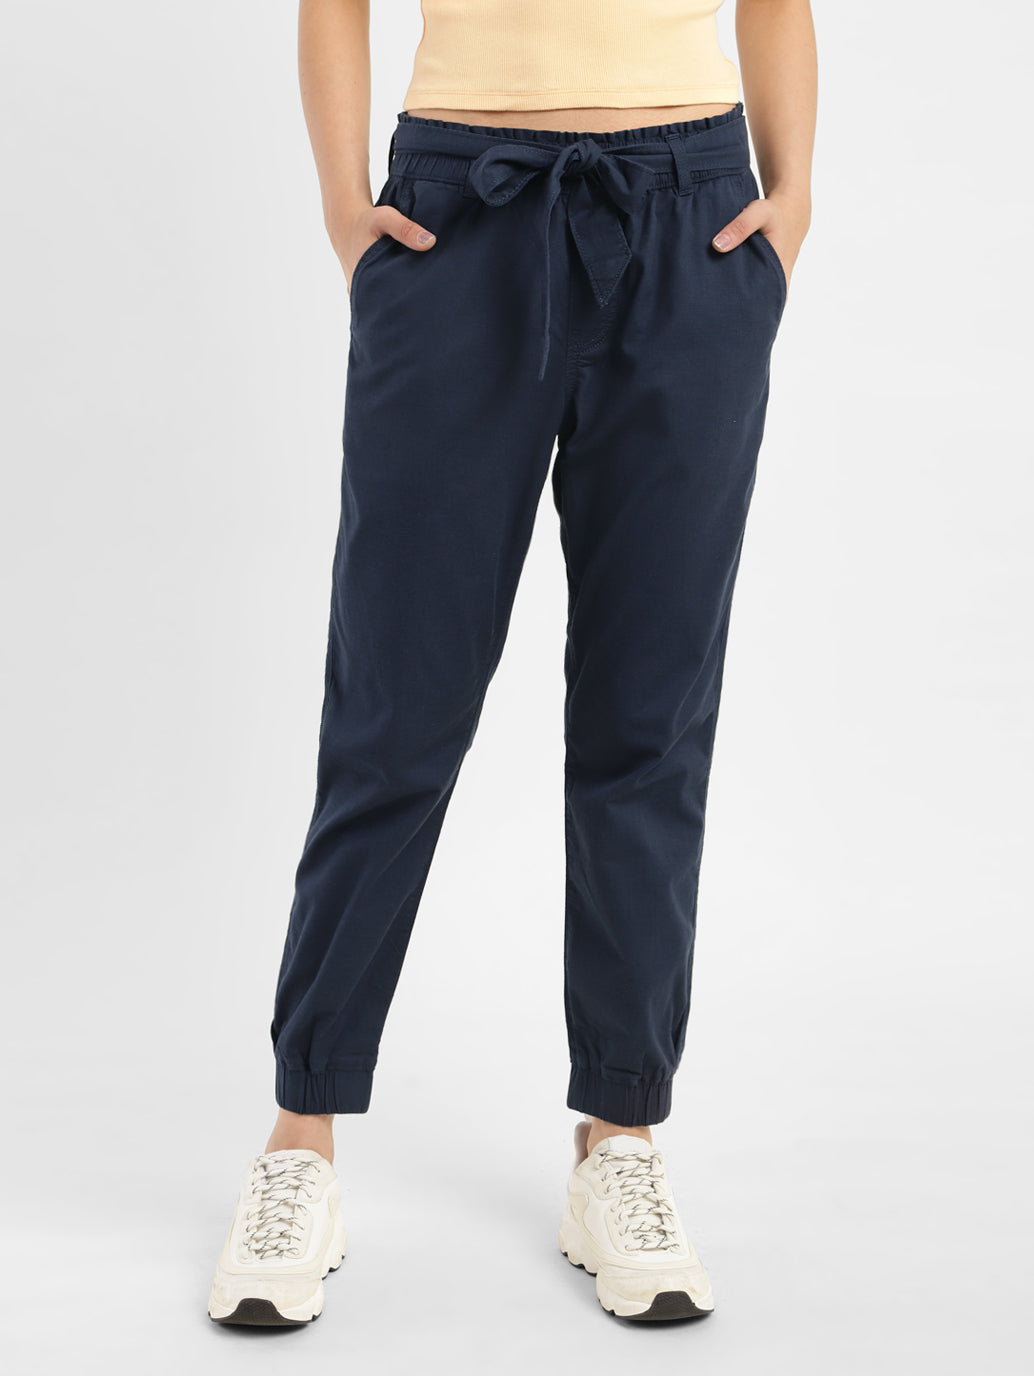 Buy Stylish Joggers for Women Online in India at Low Prices